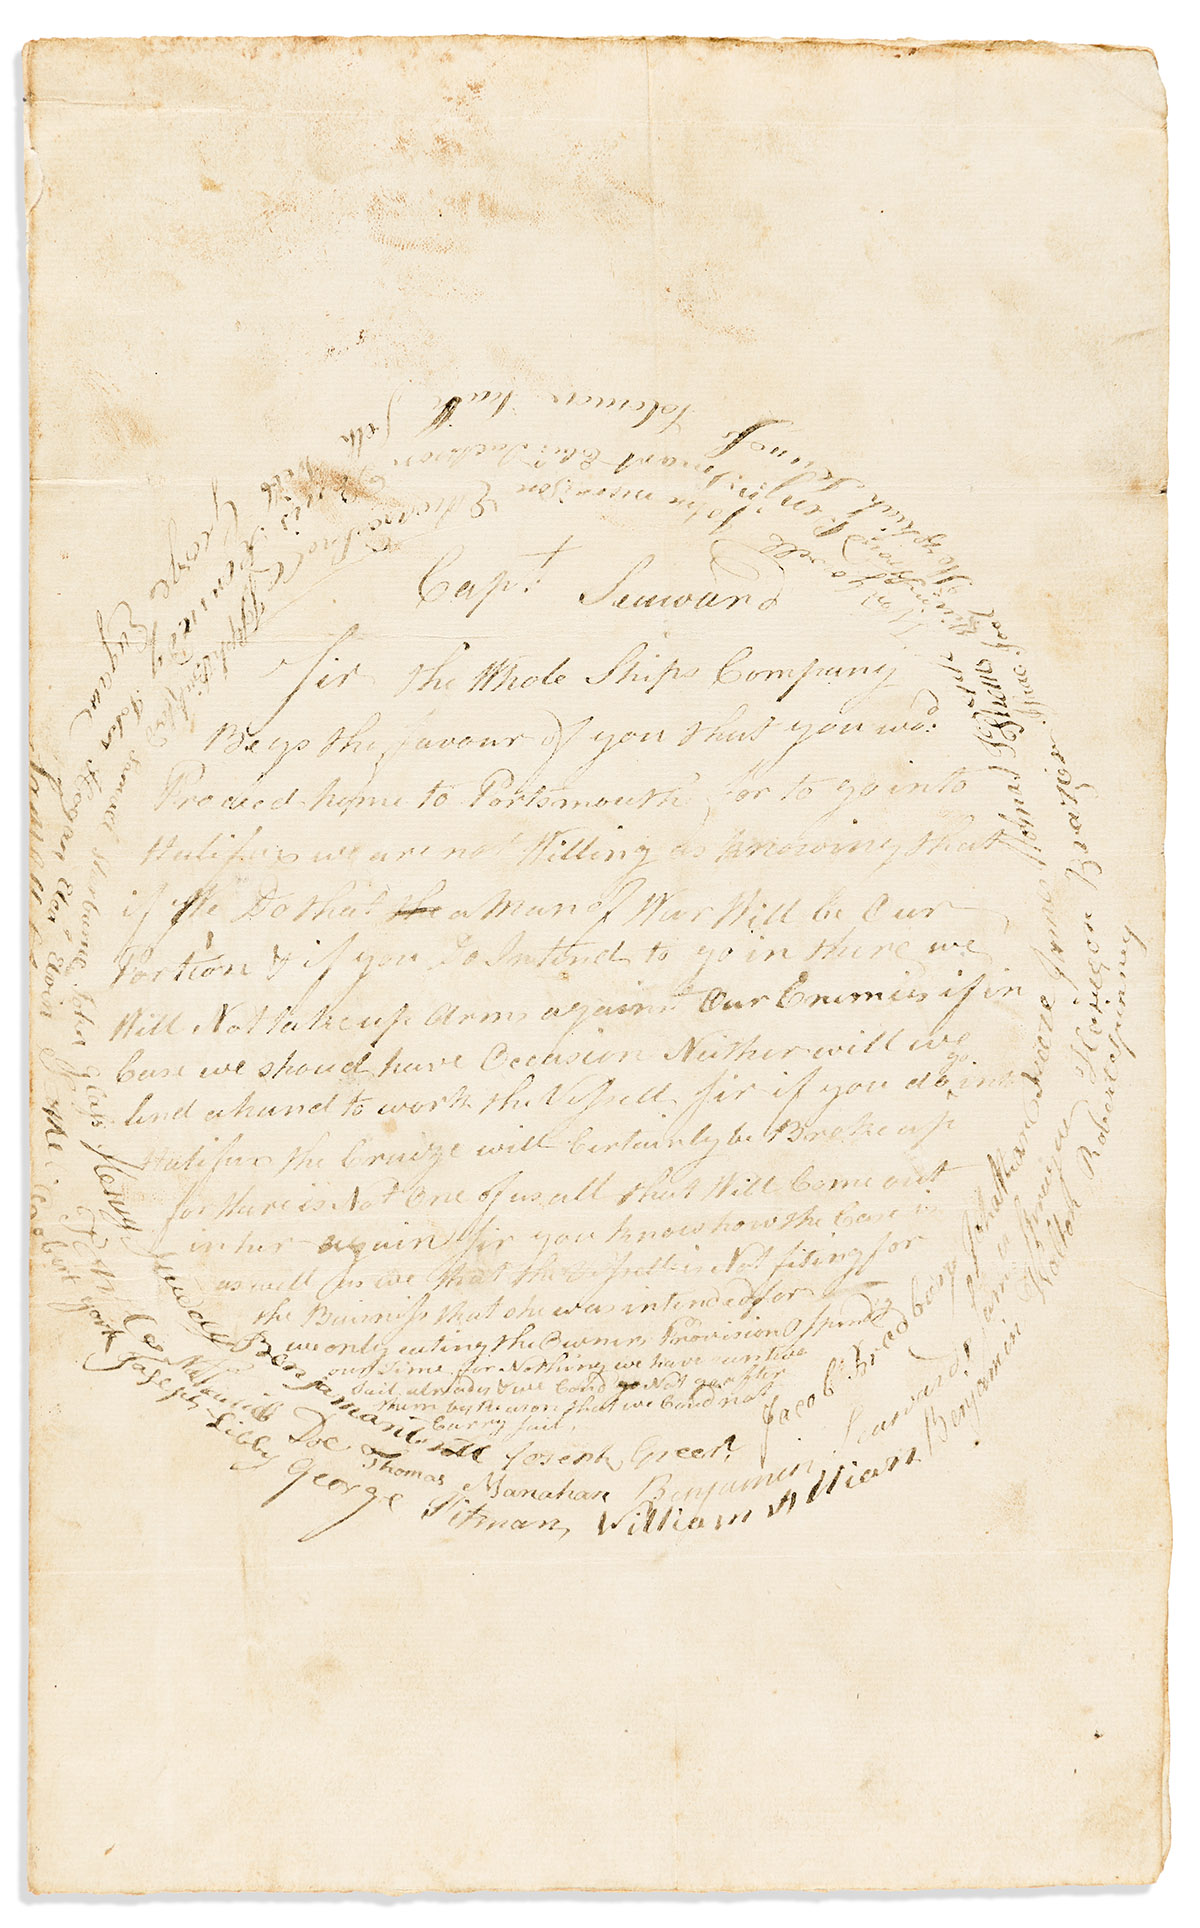 (COLONIAL WARS.) Round robin letter addressed to the captain of the Prince Edward, Private Ship of War.